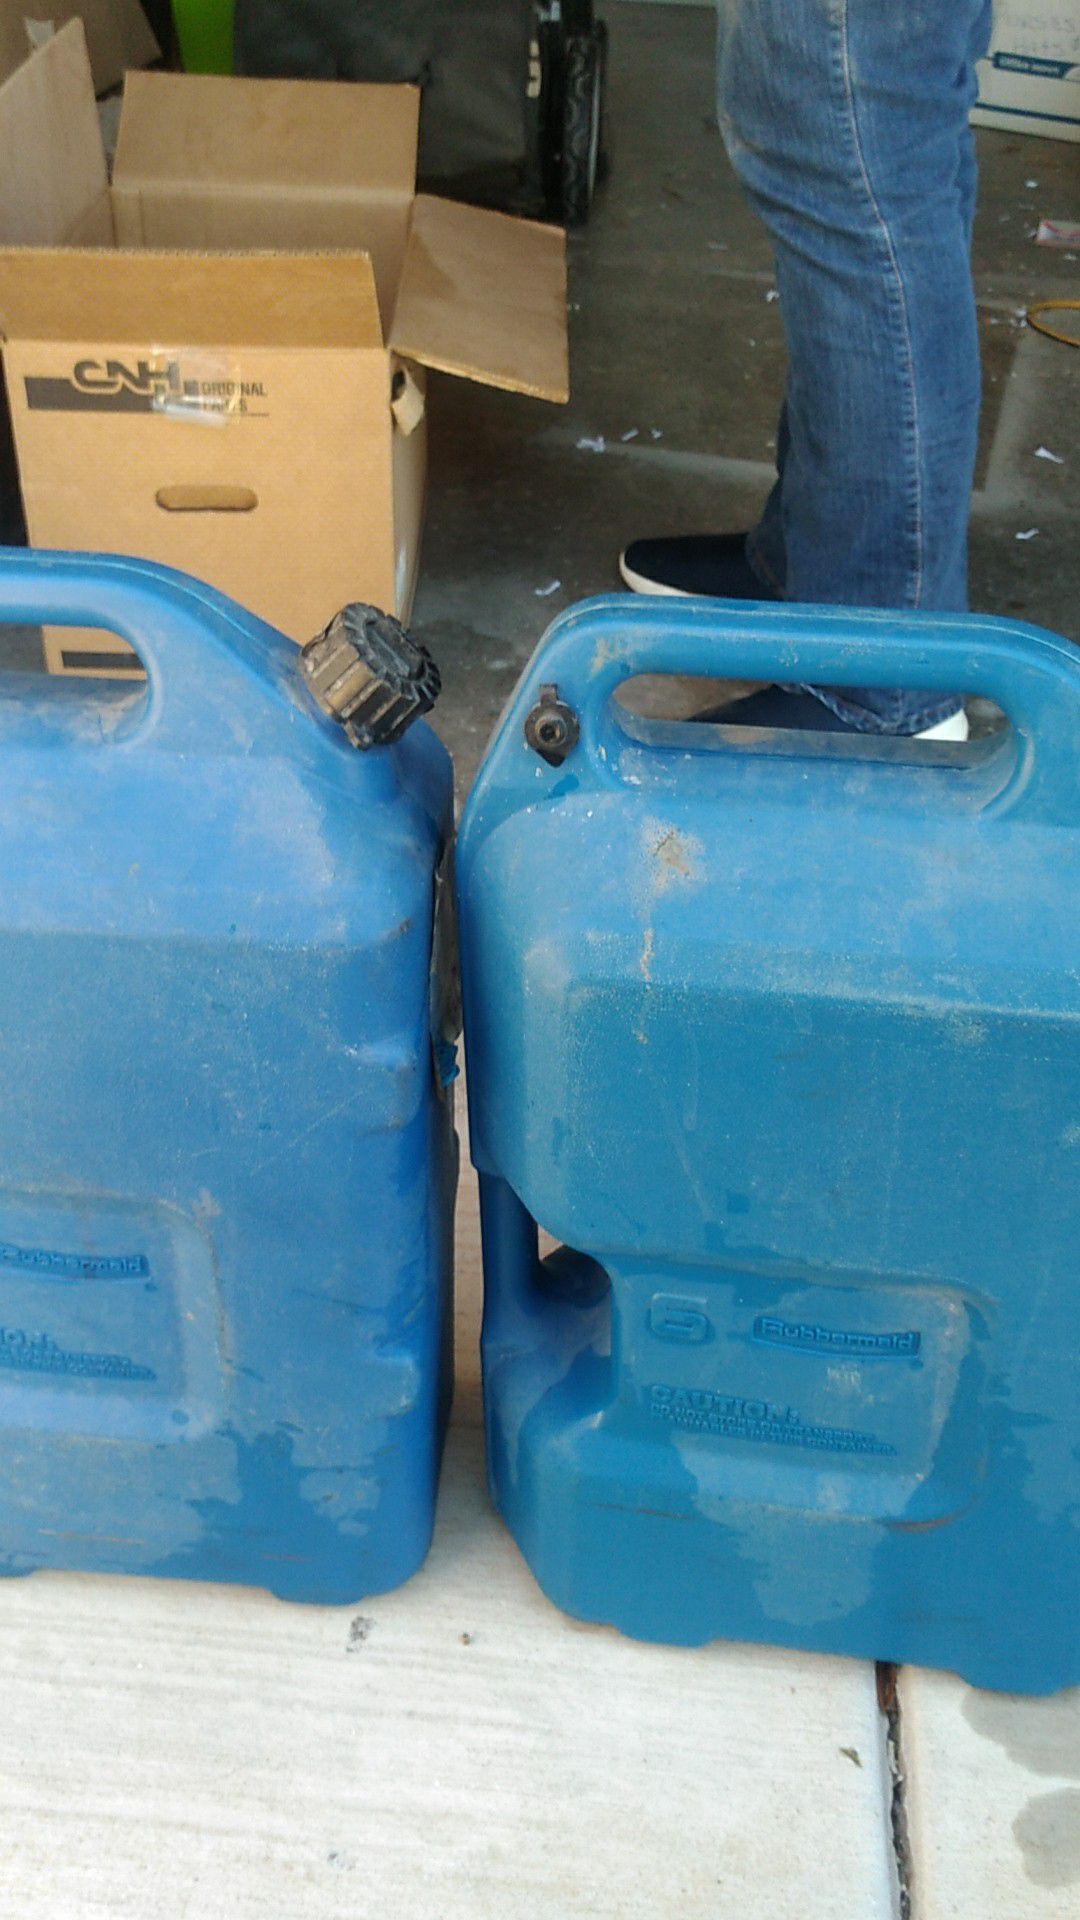 2 6 gallon water cans